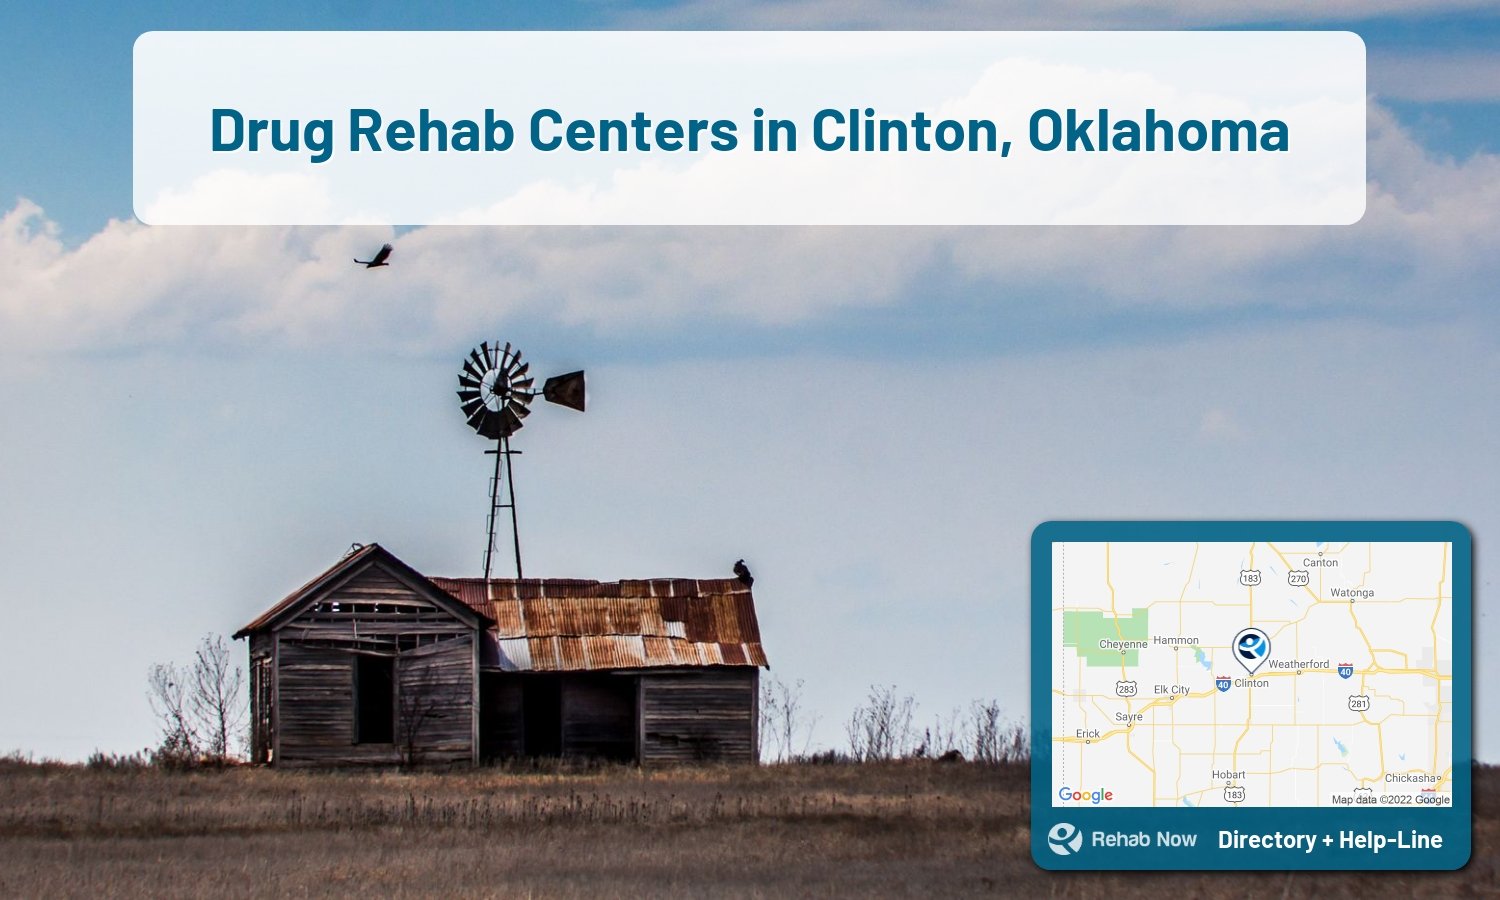 View options, availability, treatment methods, and more, for drug rehab and alcohol treatment in Clinton, Oklahoma